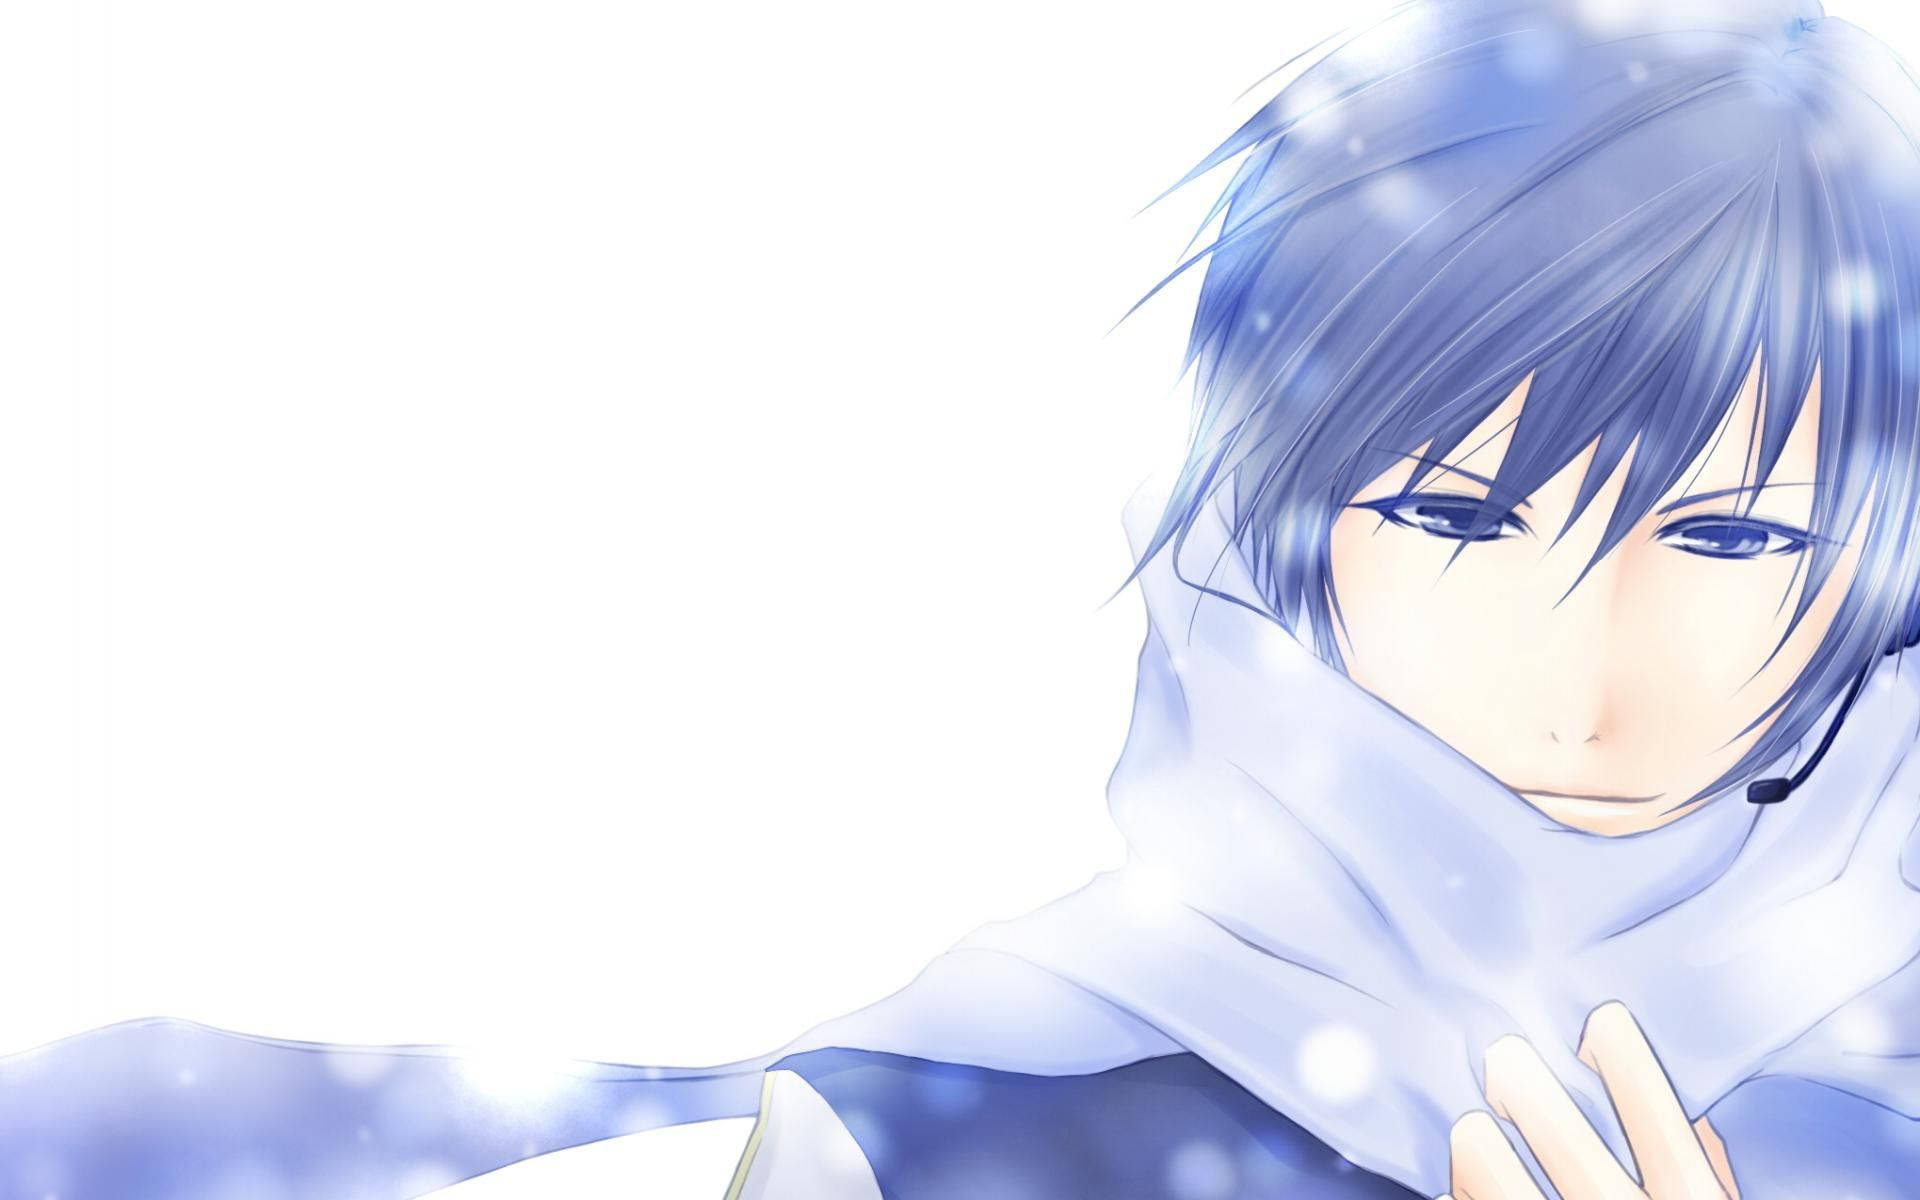 'a Cool Blue-haired Anime Boy In Winter Wonderland.' Background